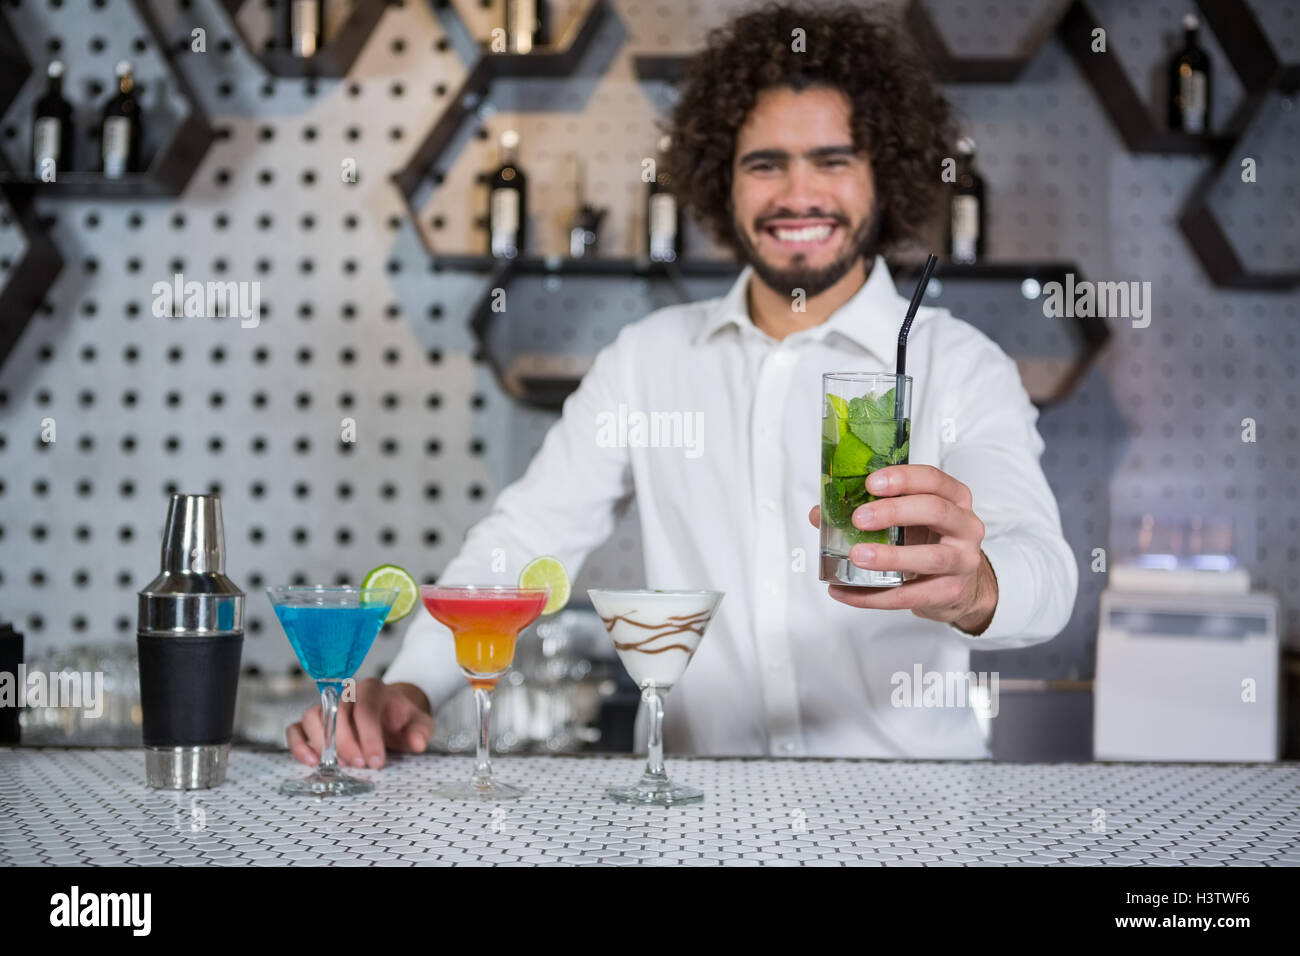 Bartender serving glass of gin Stock Photo